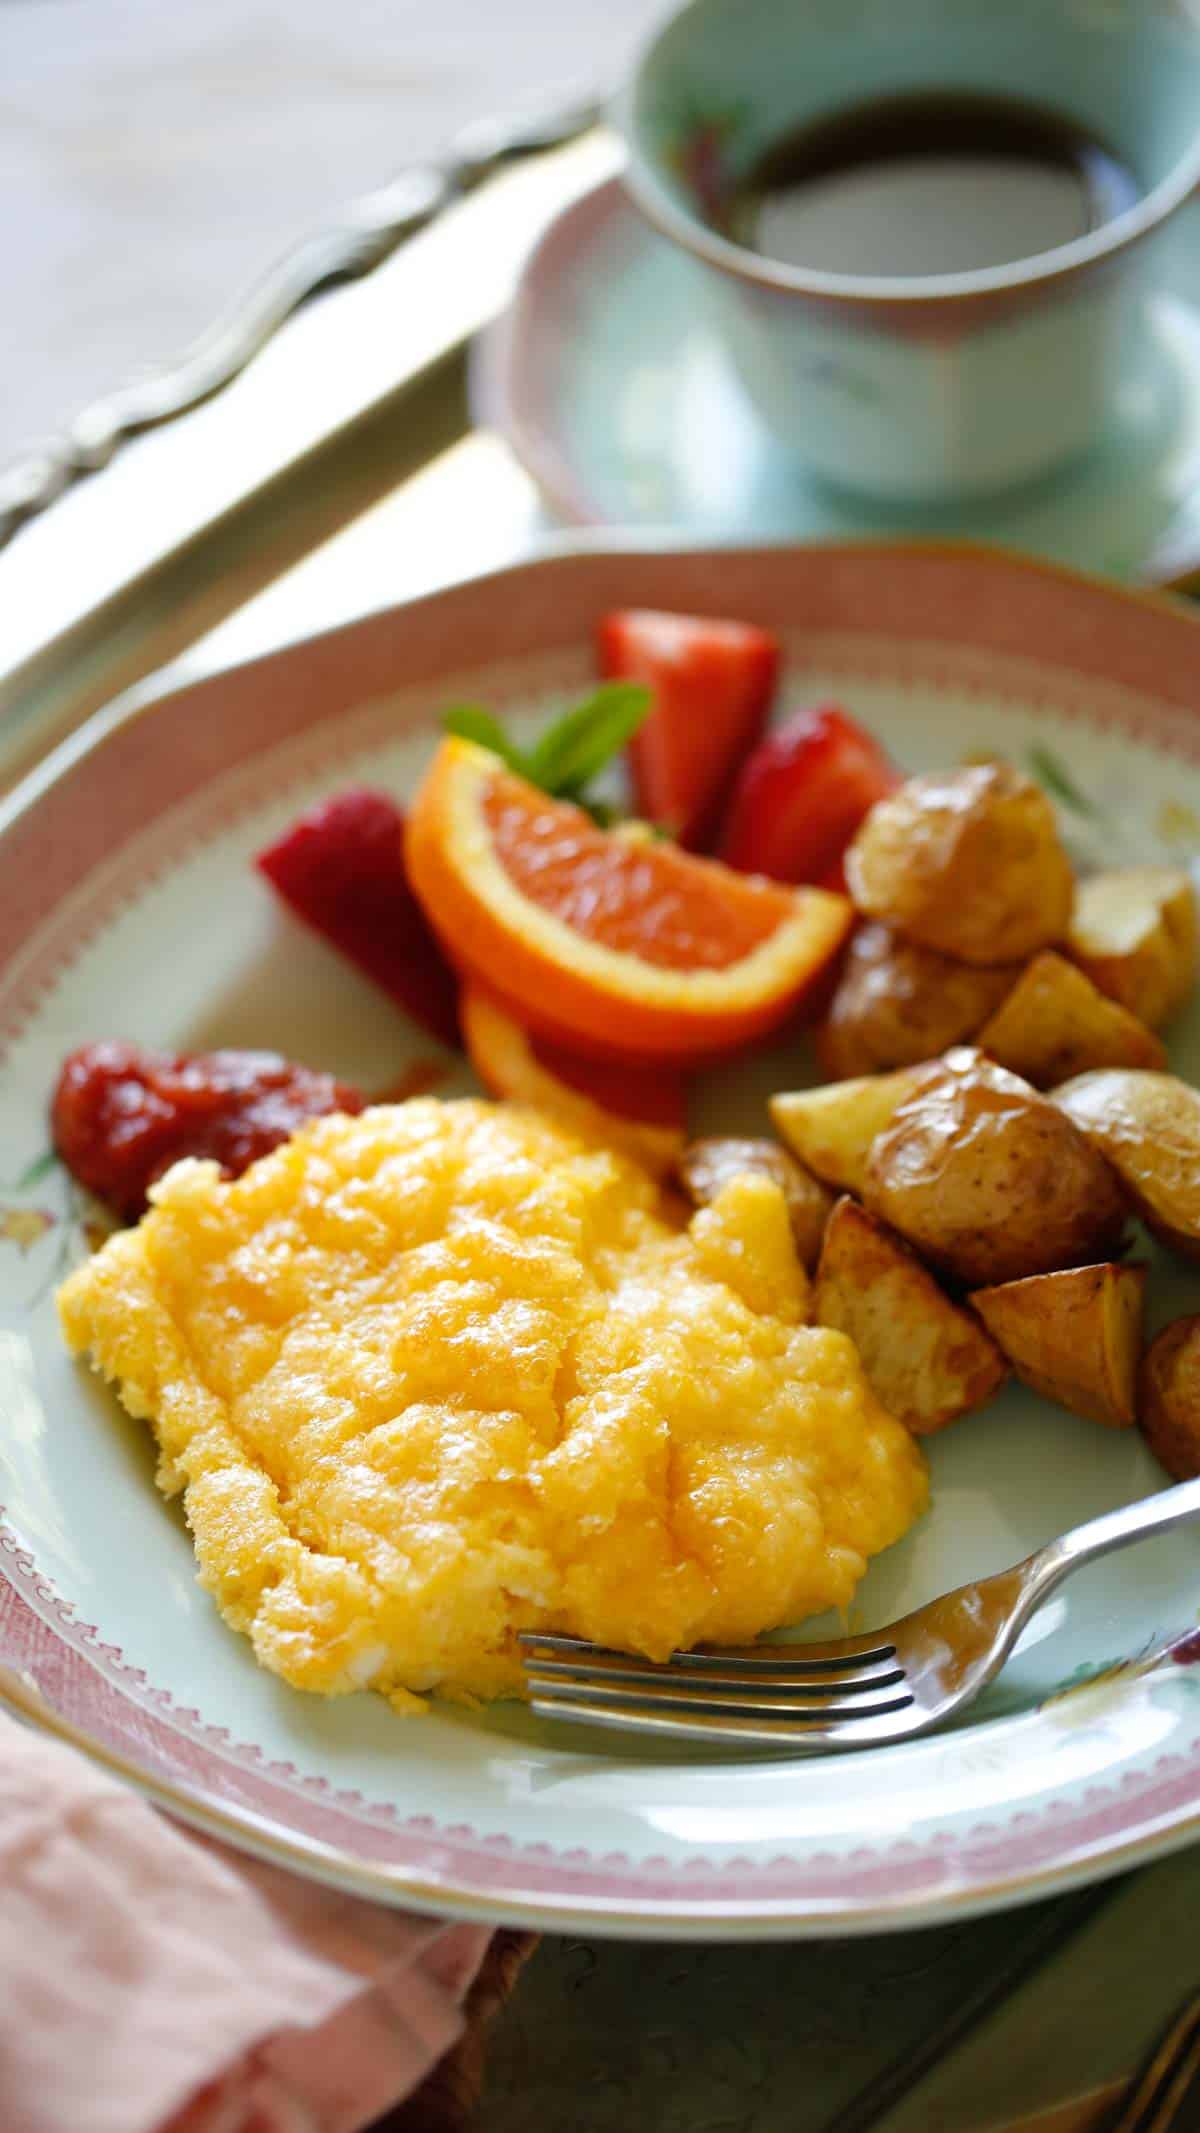 a plate of eggs, potatoes, salsa and fruit